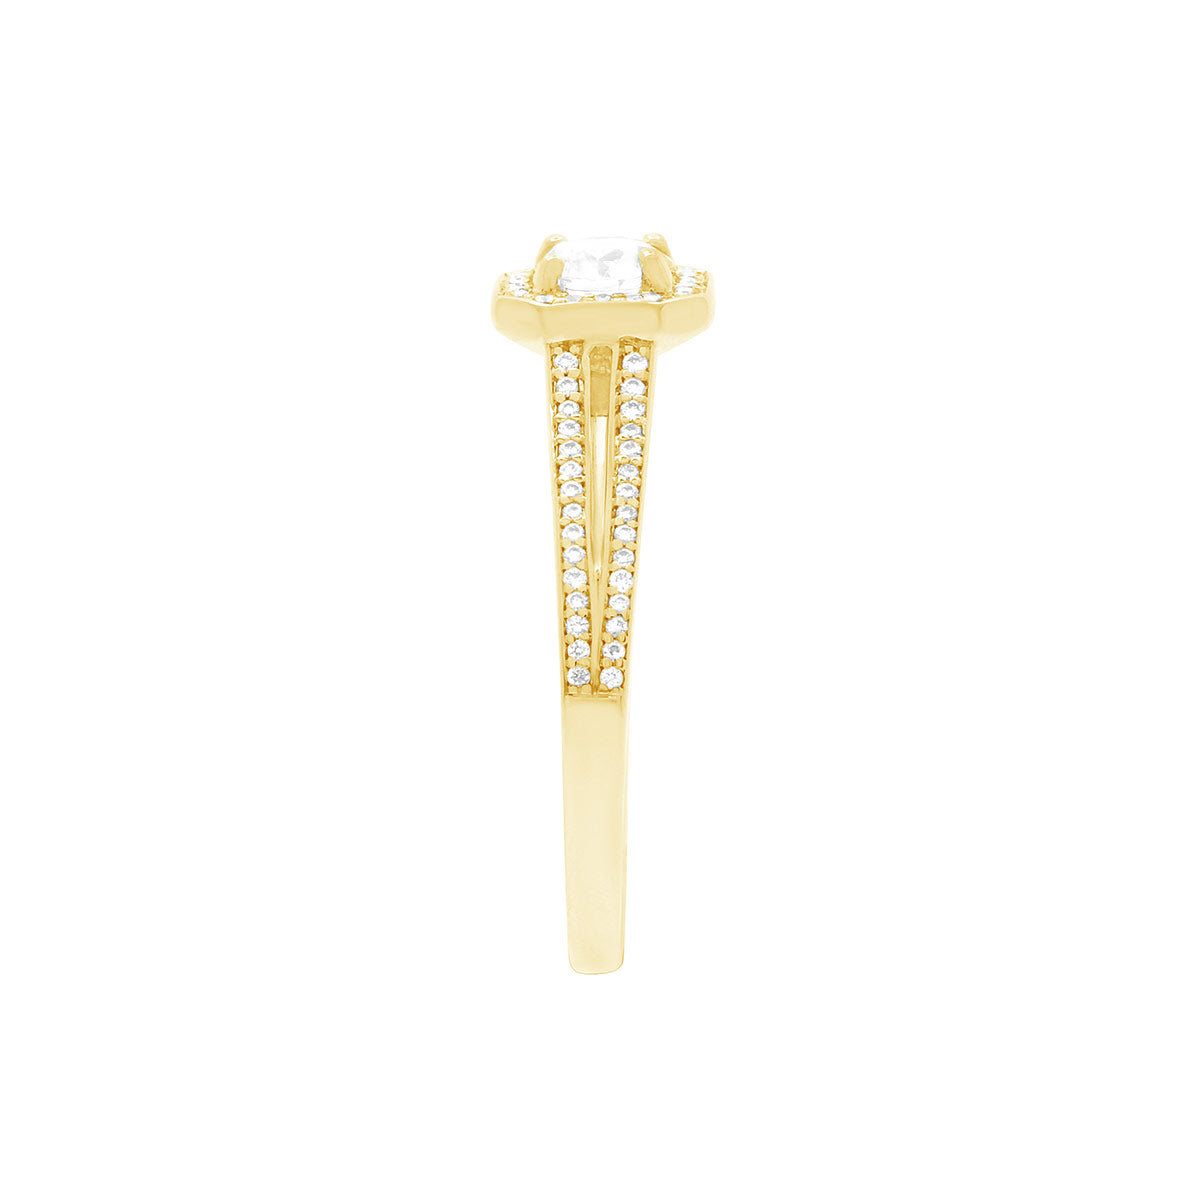 Pavé Halo Diamond Ring in yellow gold pictured from a side angle